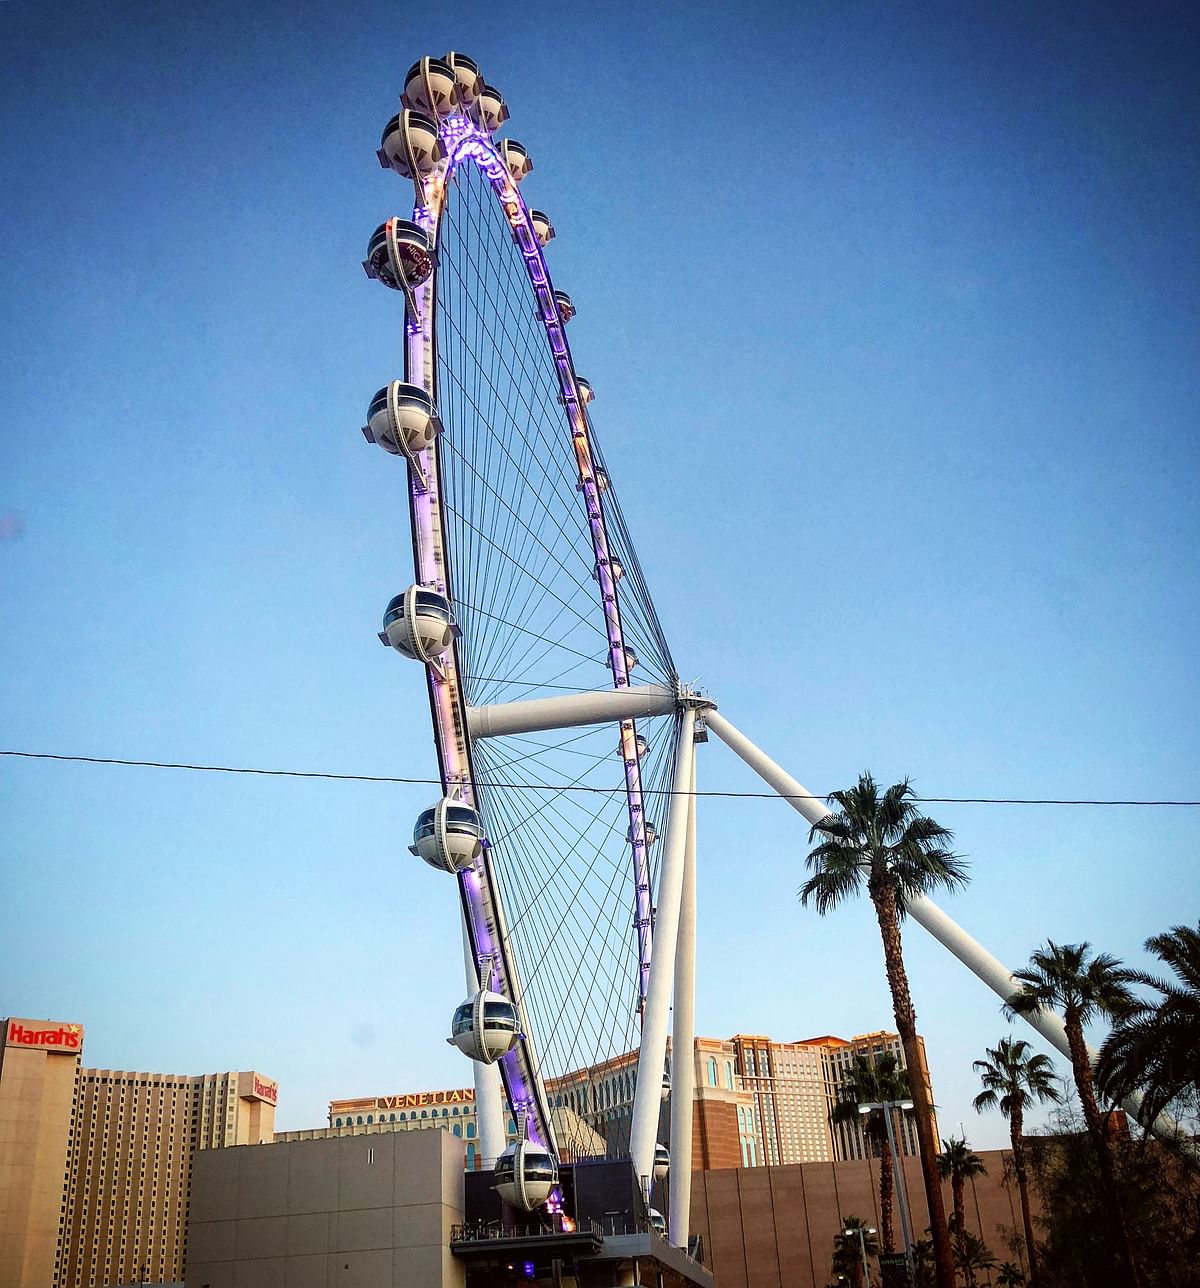 The High Roller.